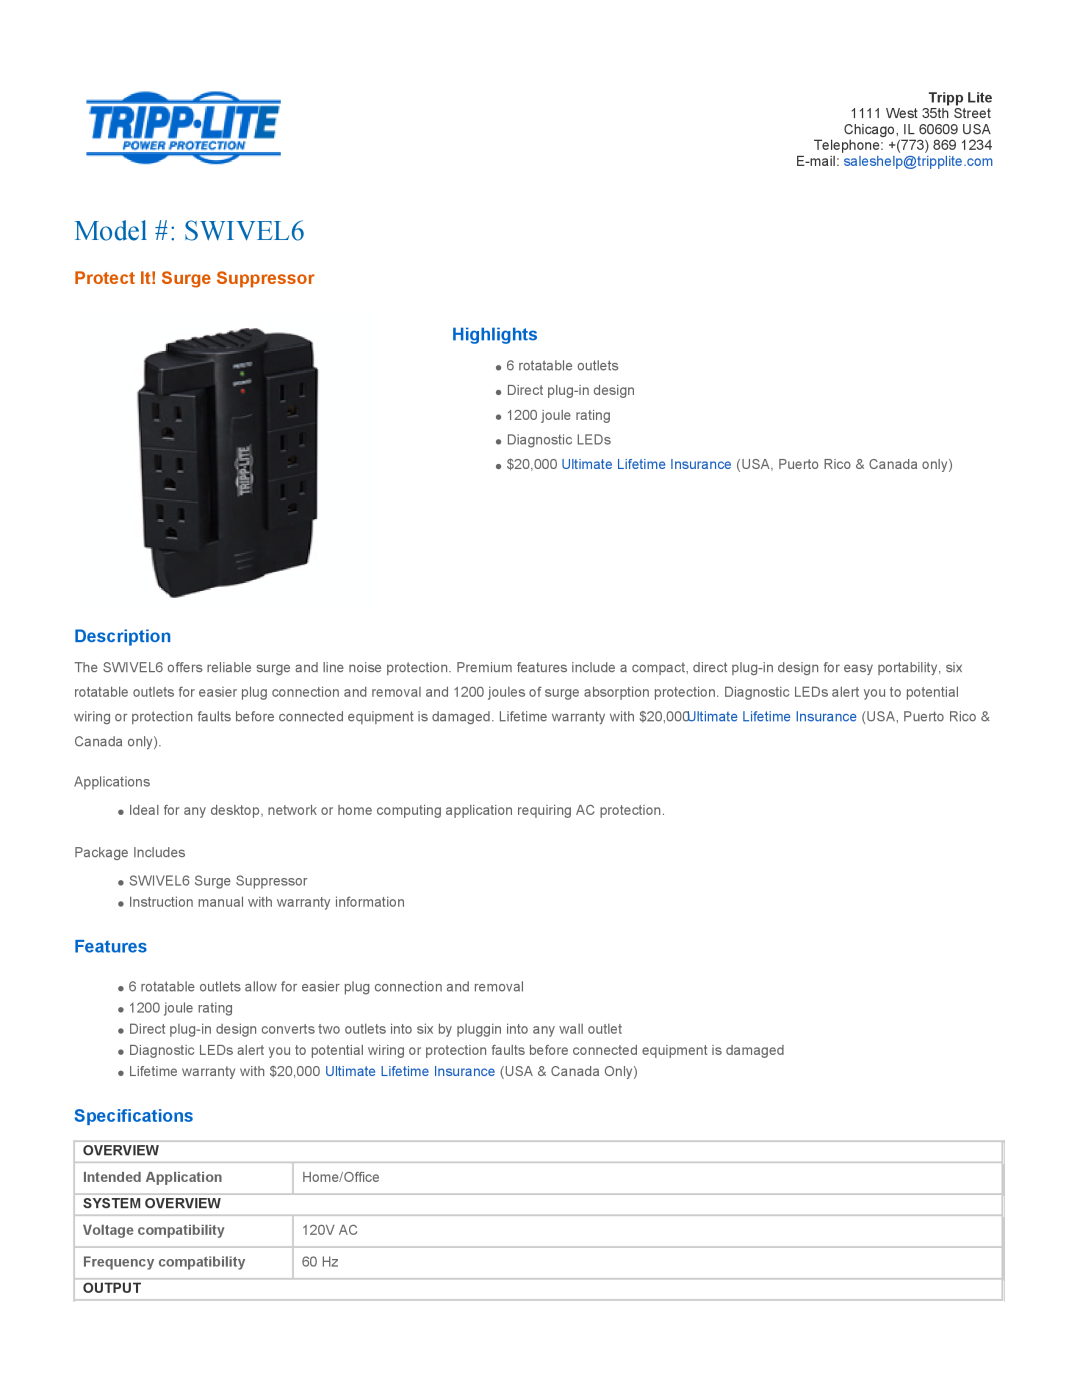 Tripp Lite specifications System Overview, Output, Model # SWIVEL6, Protect It! Surge Suppressor, Highlights 